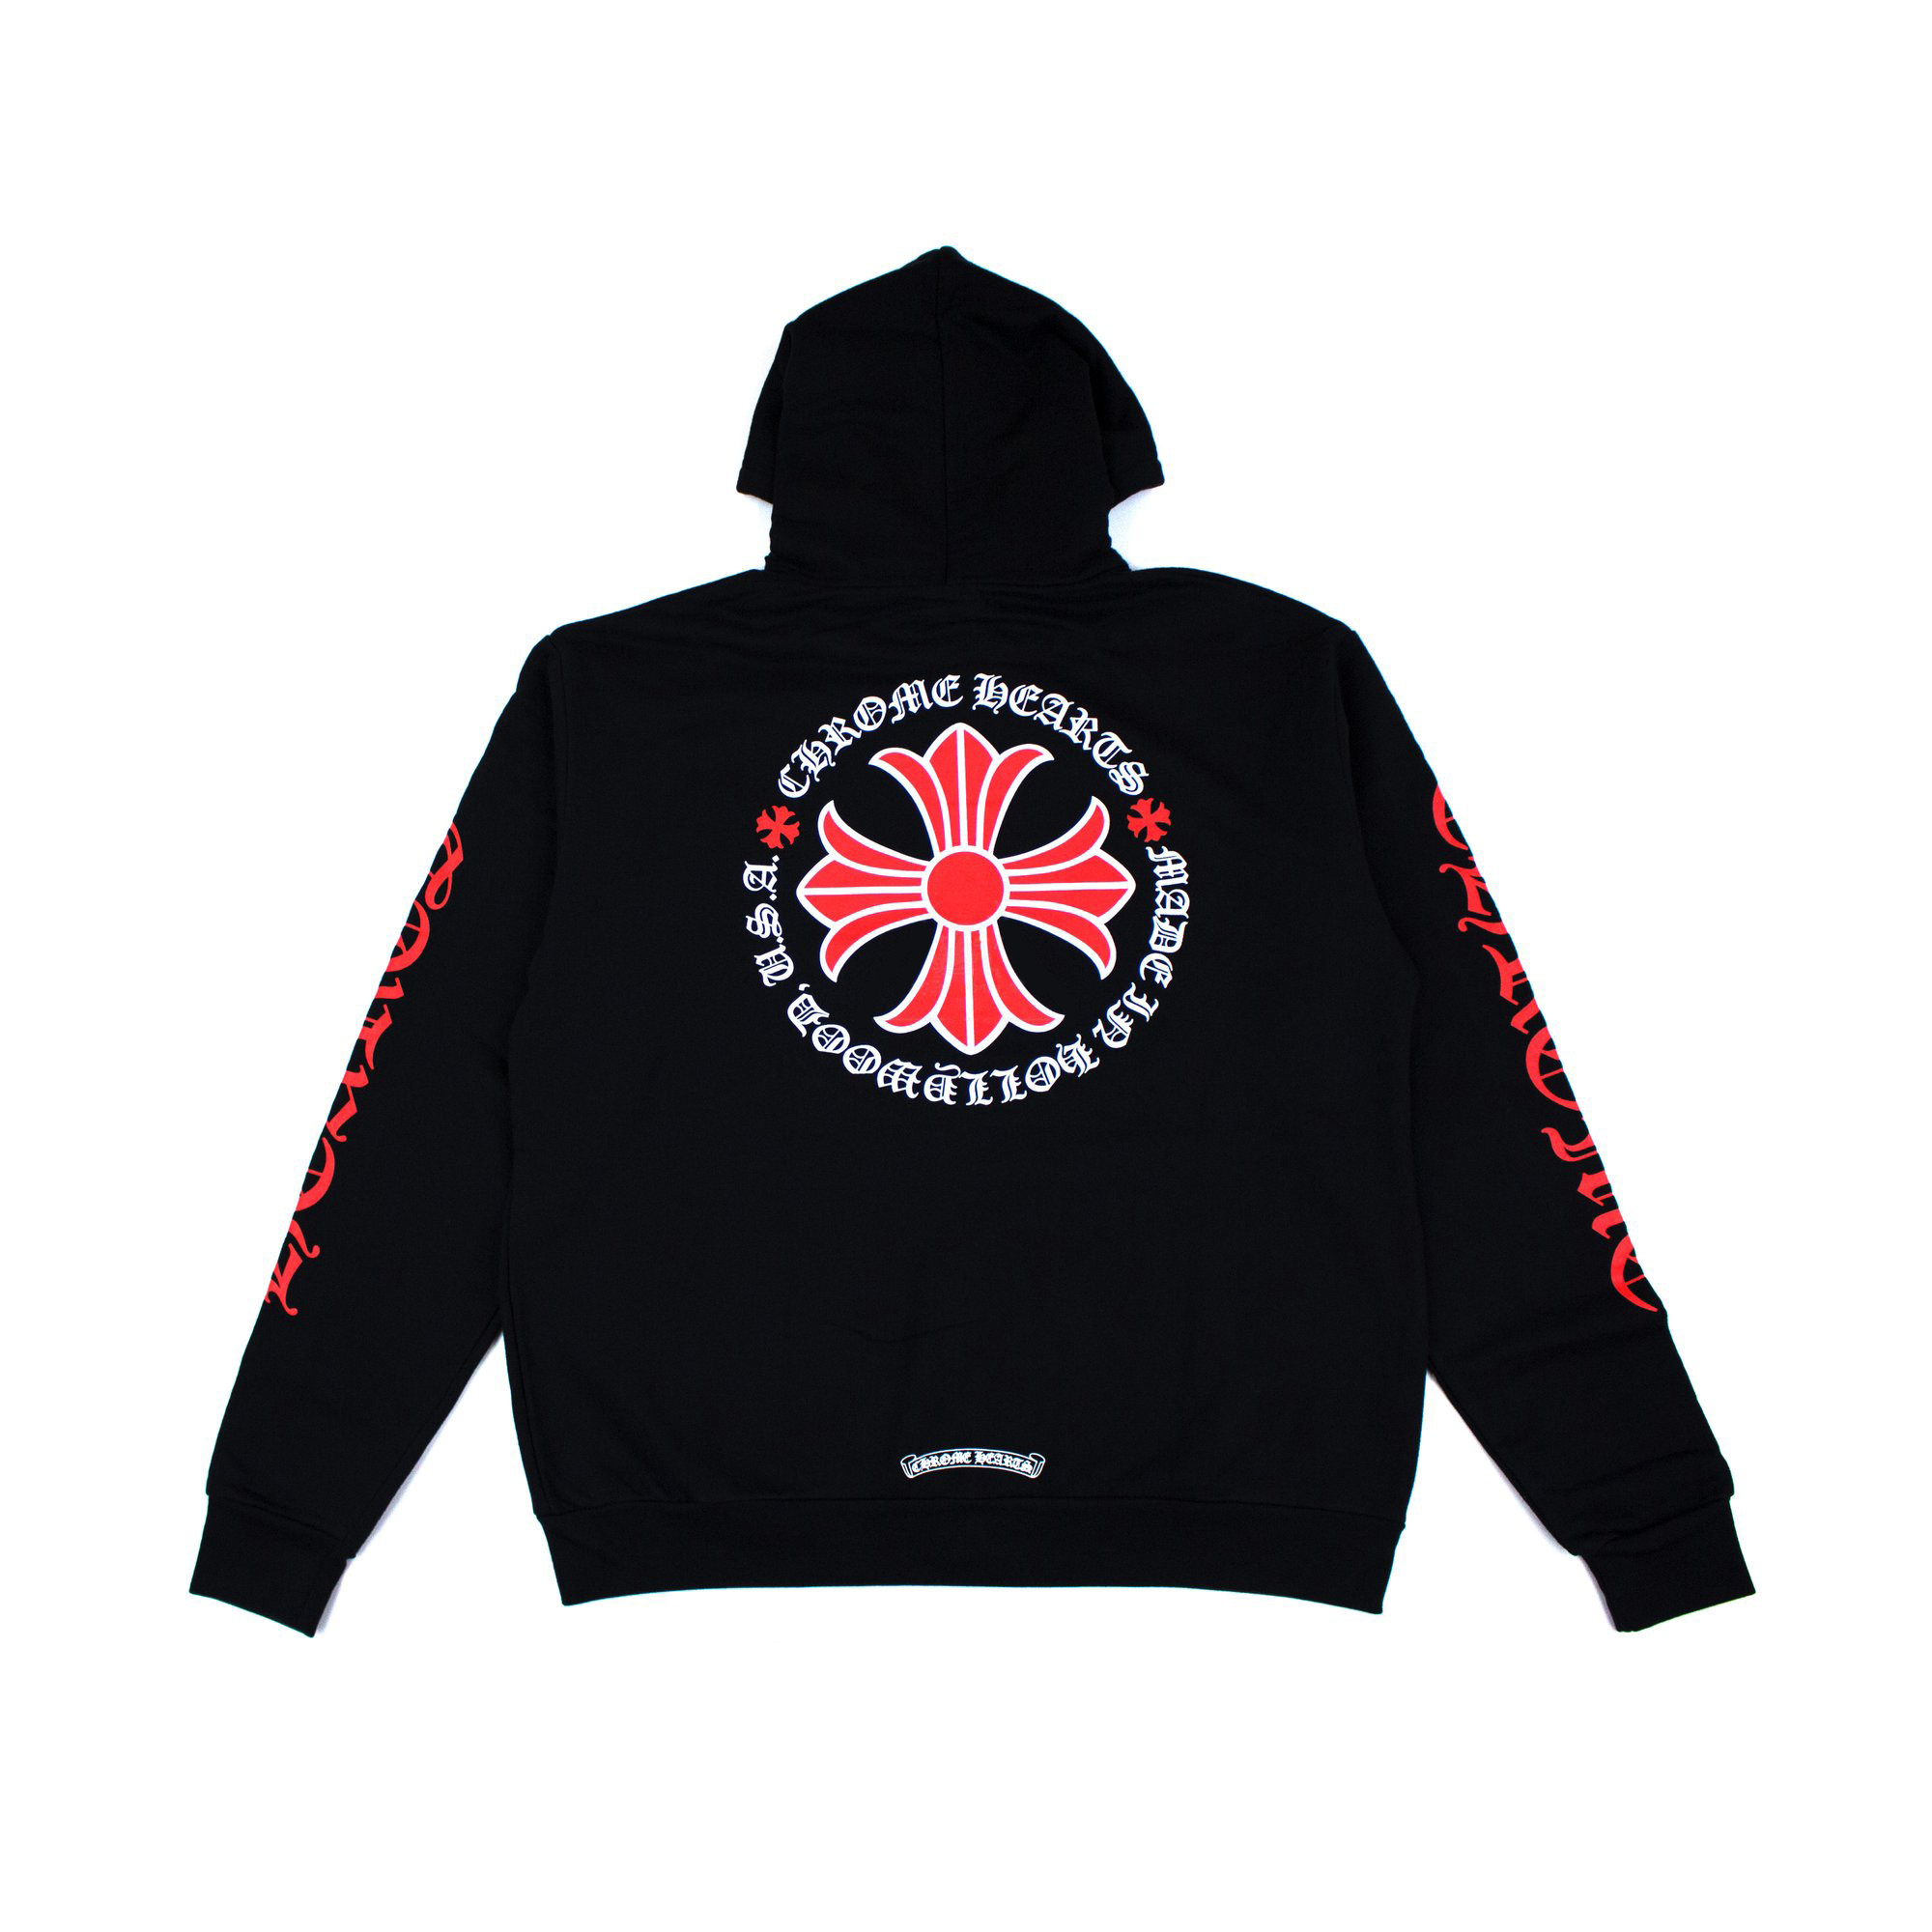 Chrome Hearts Made In Hollywood Plus Cross Zip Up Hoodie Black/Red 